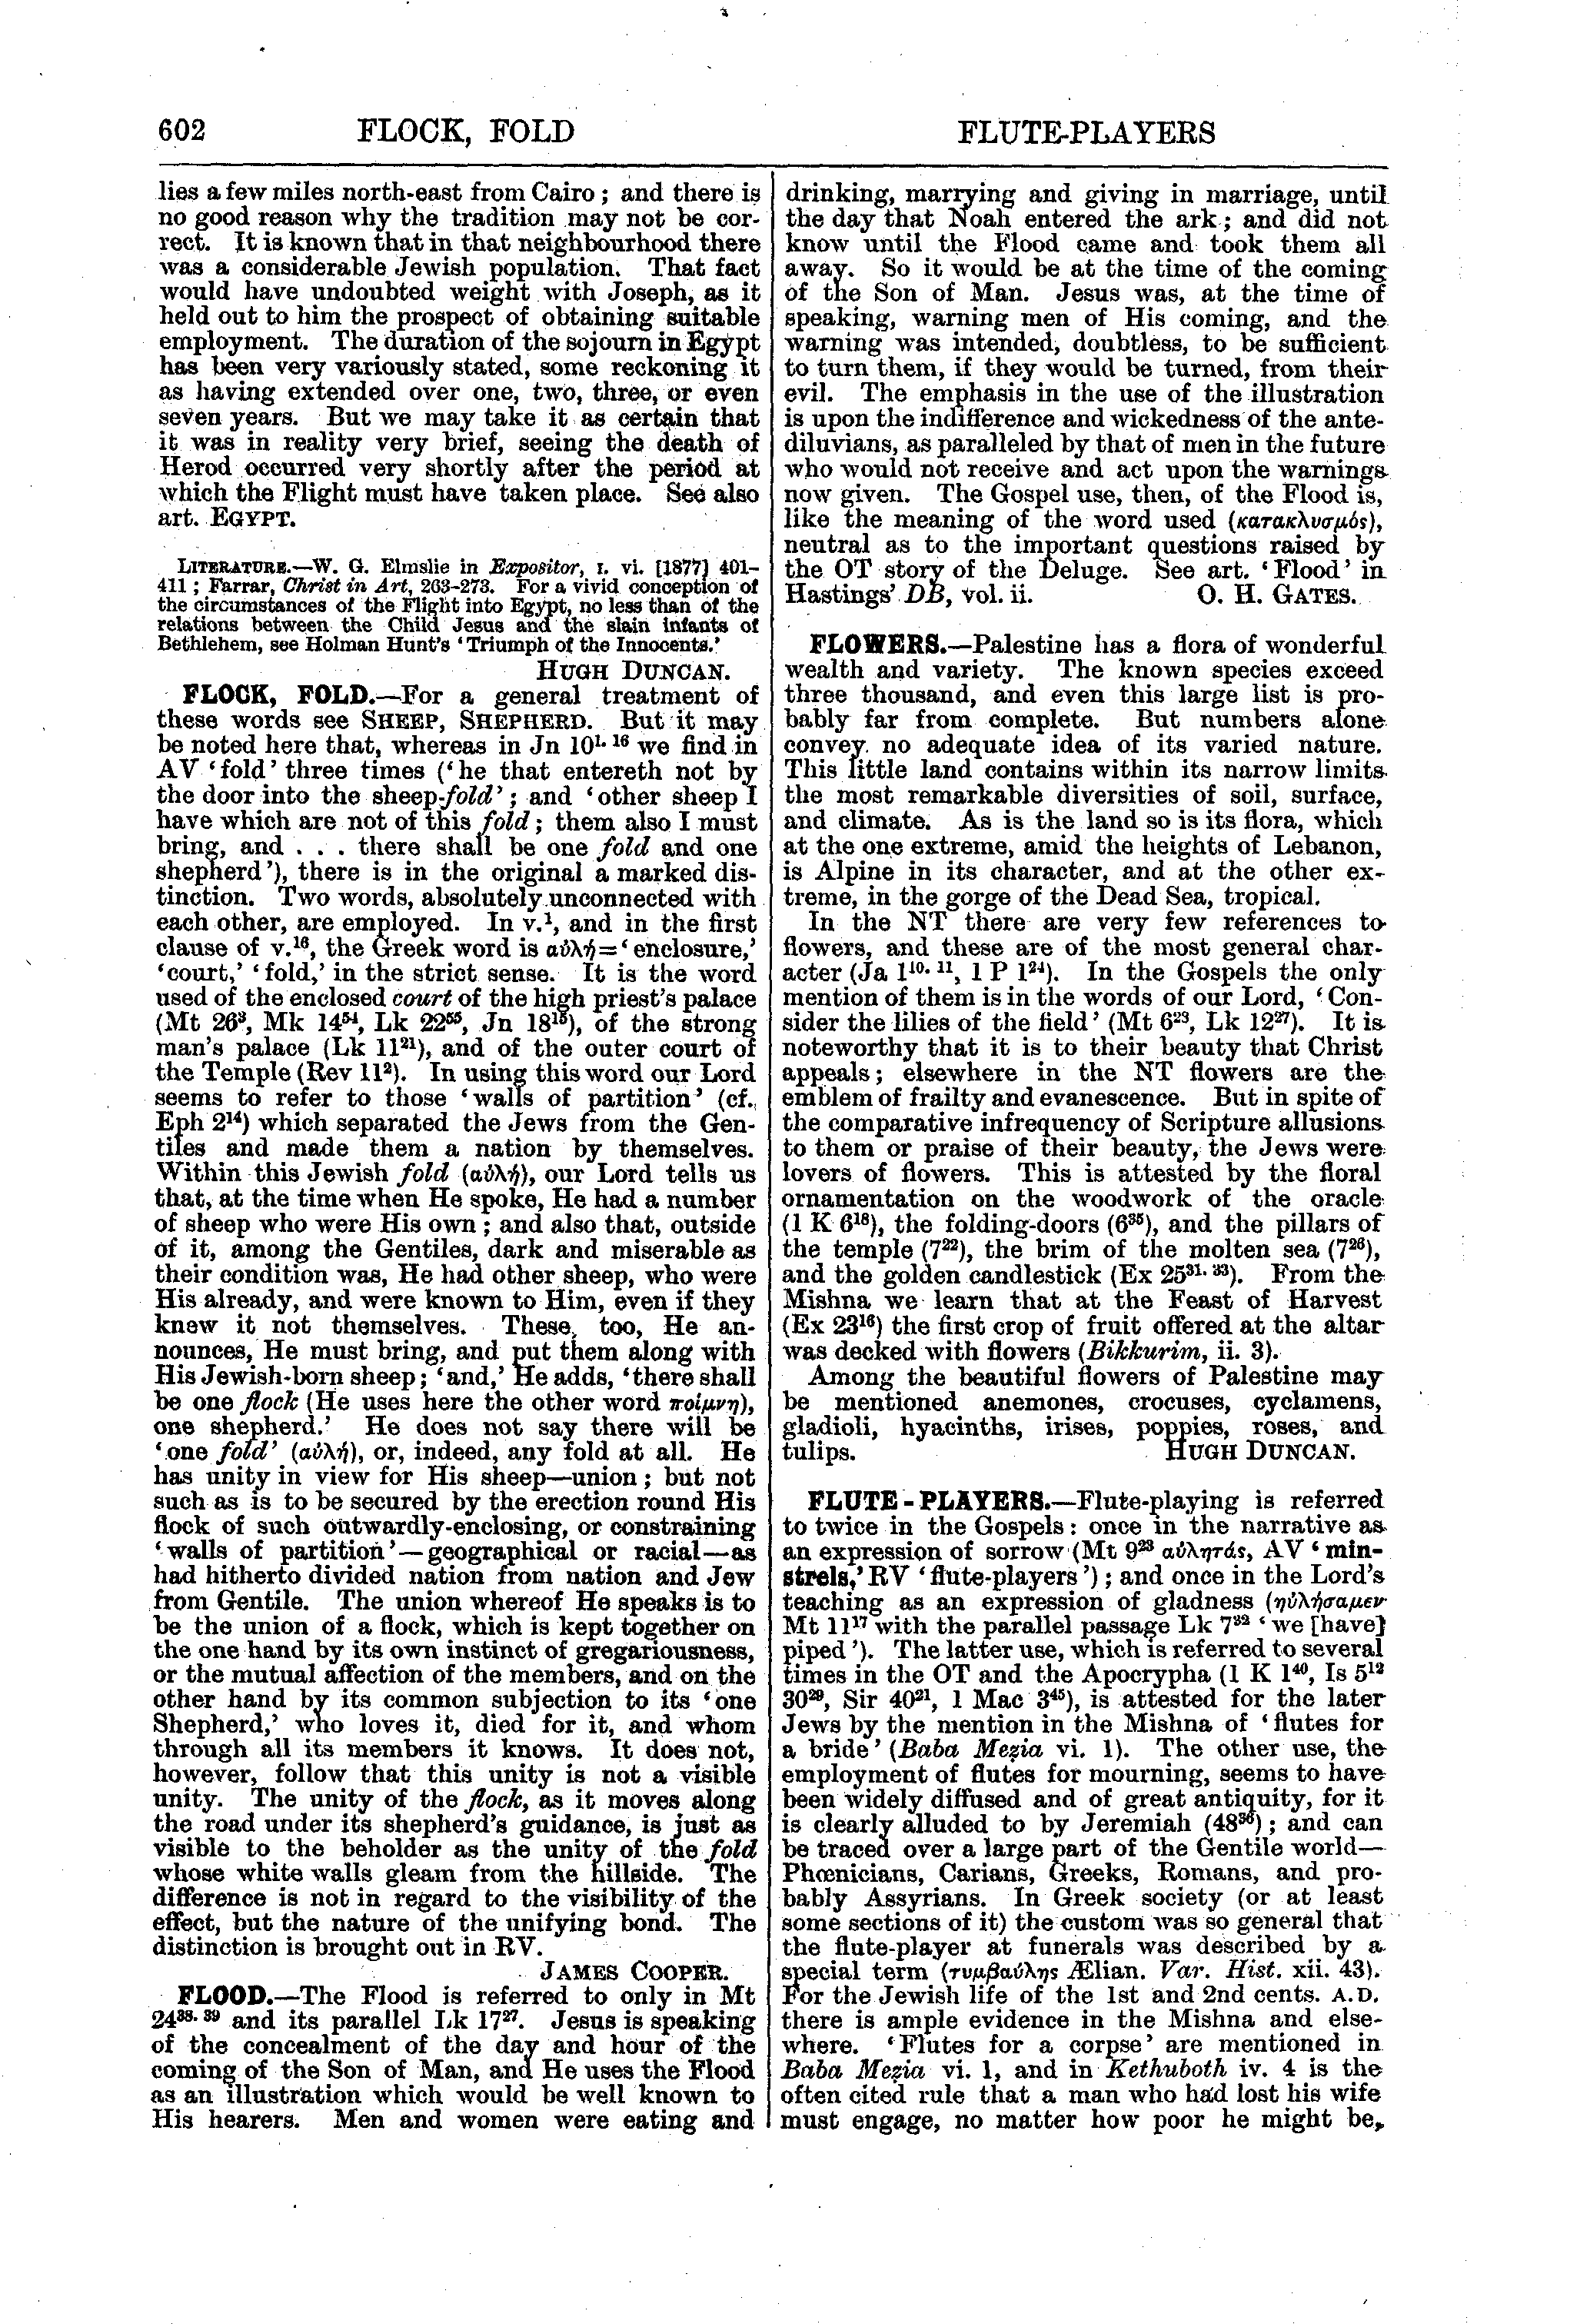 Image of page 602